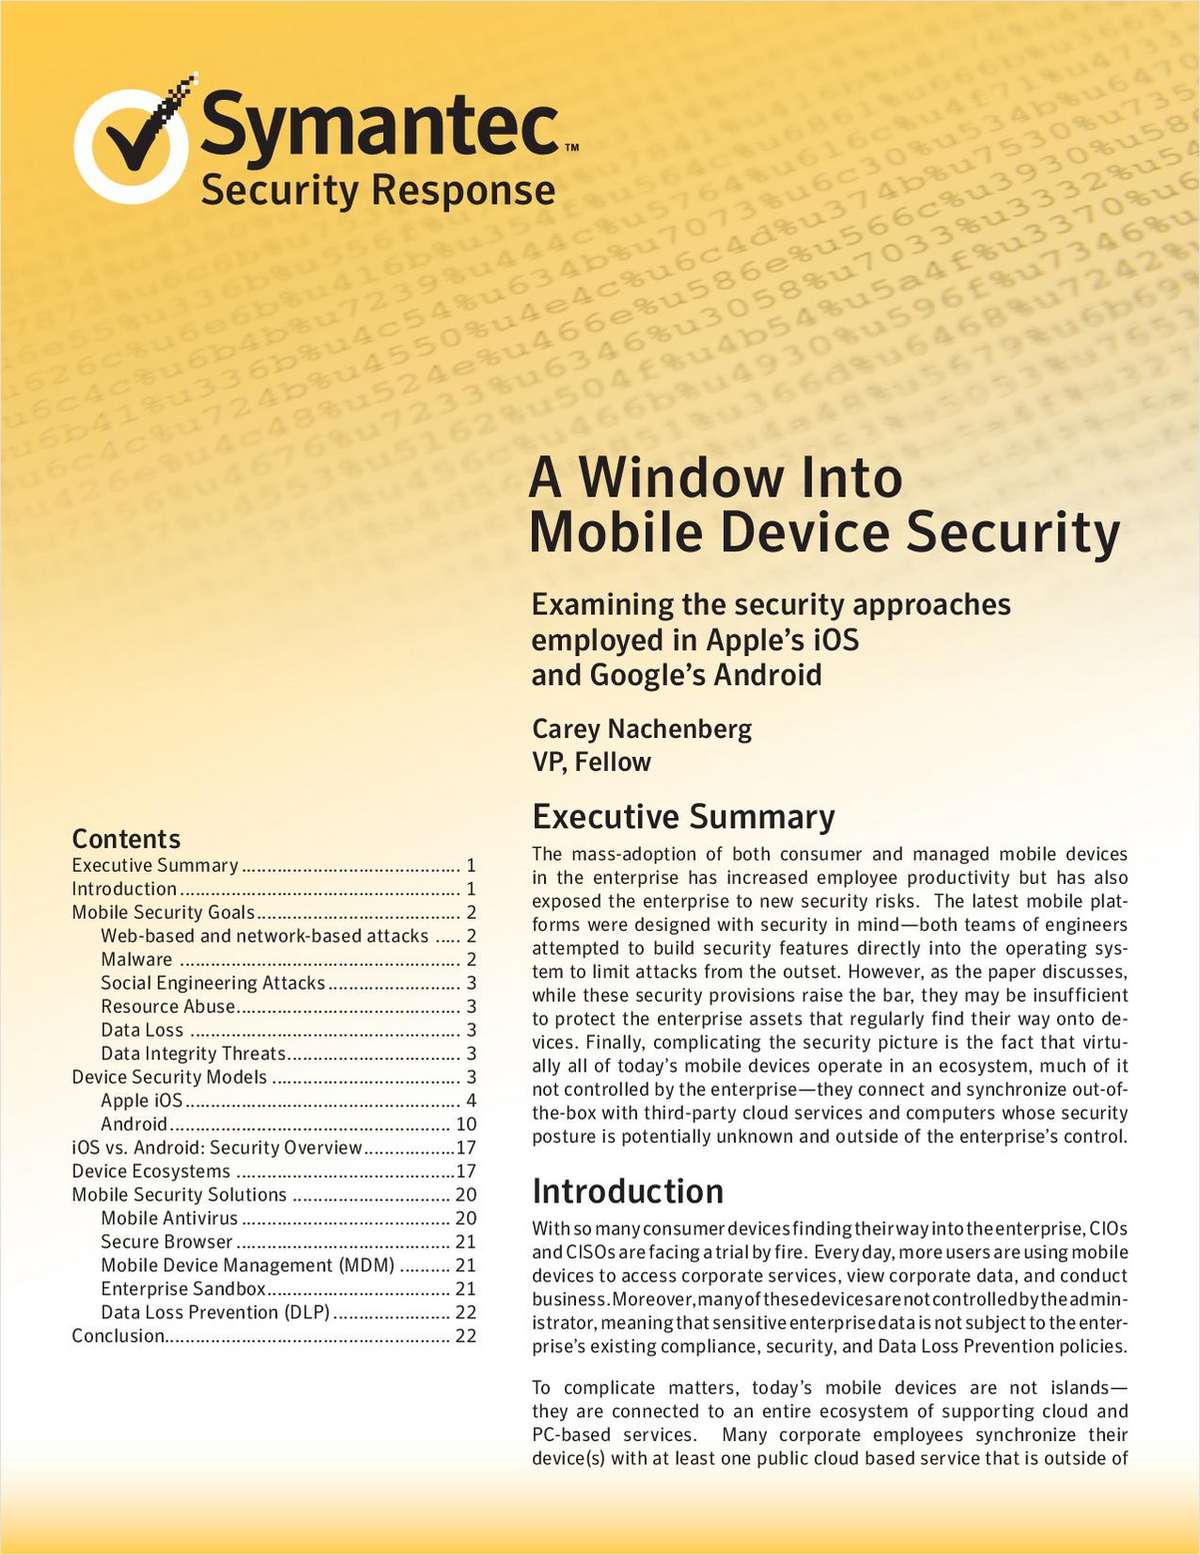 A Window into Mobile Device Security